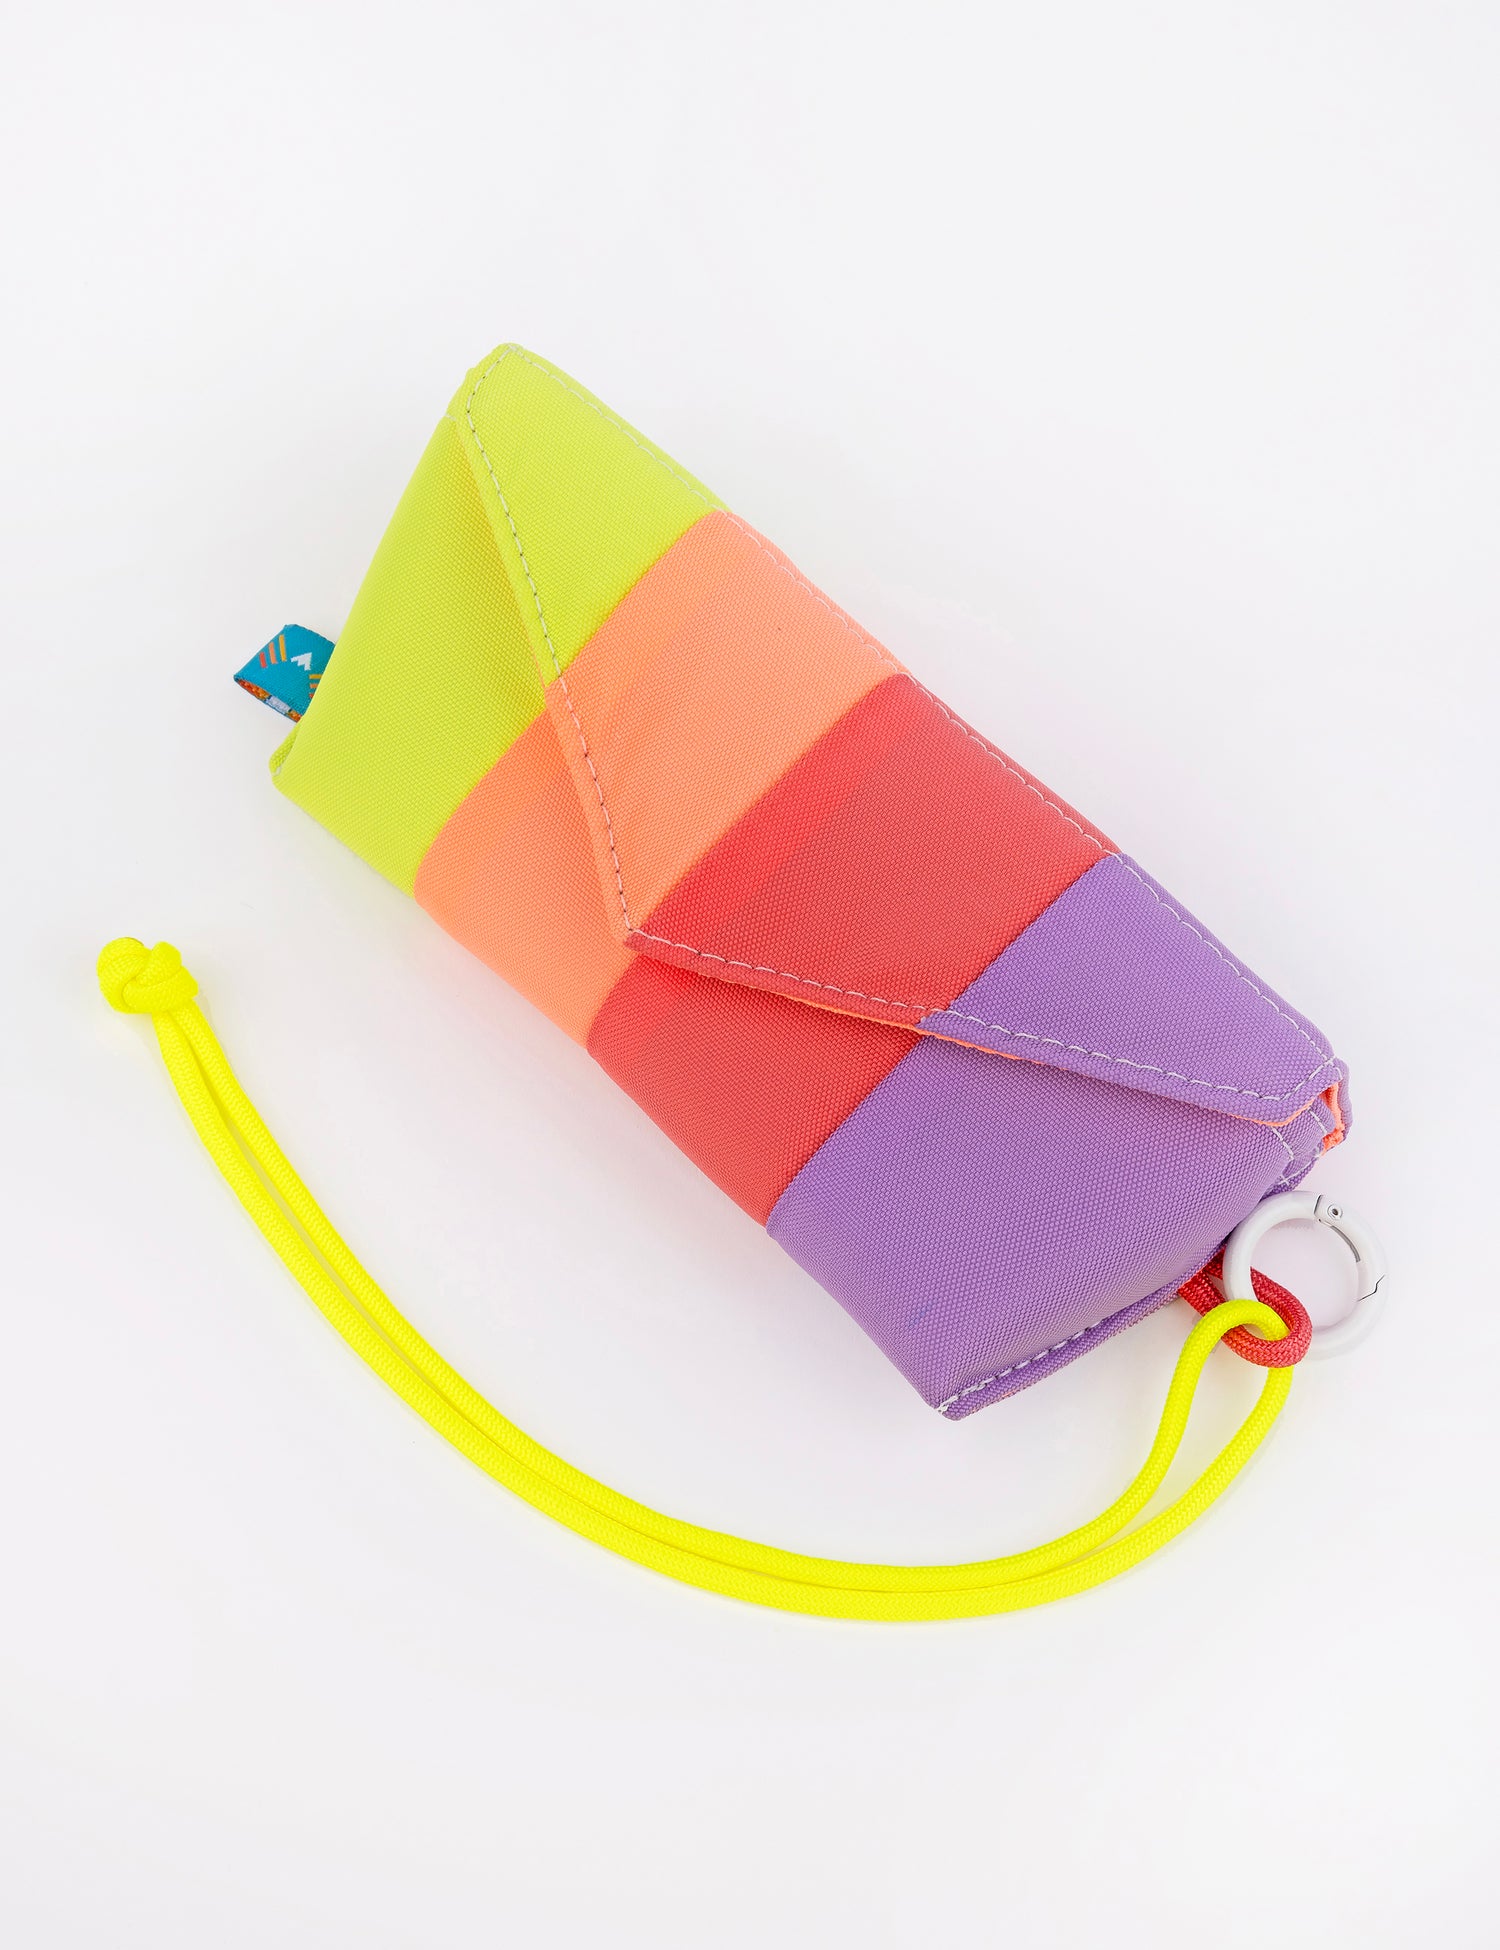 rectangular sunglasses case with yellow coral watermelon and lavender stripe design